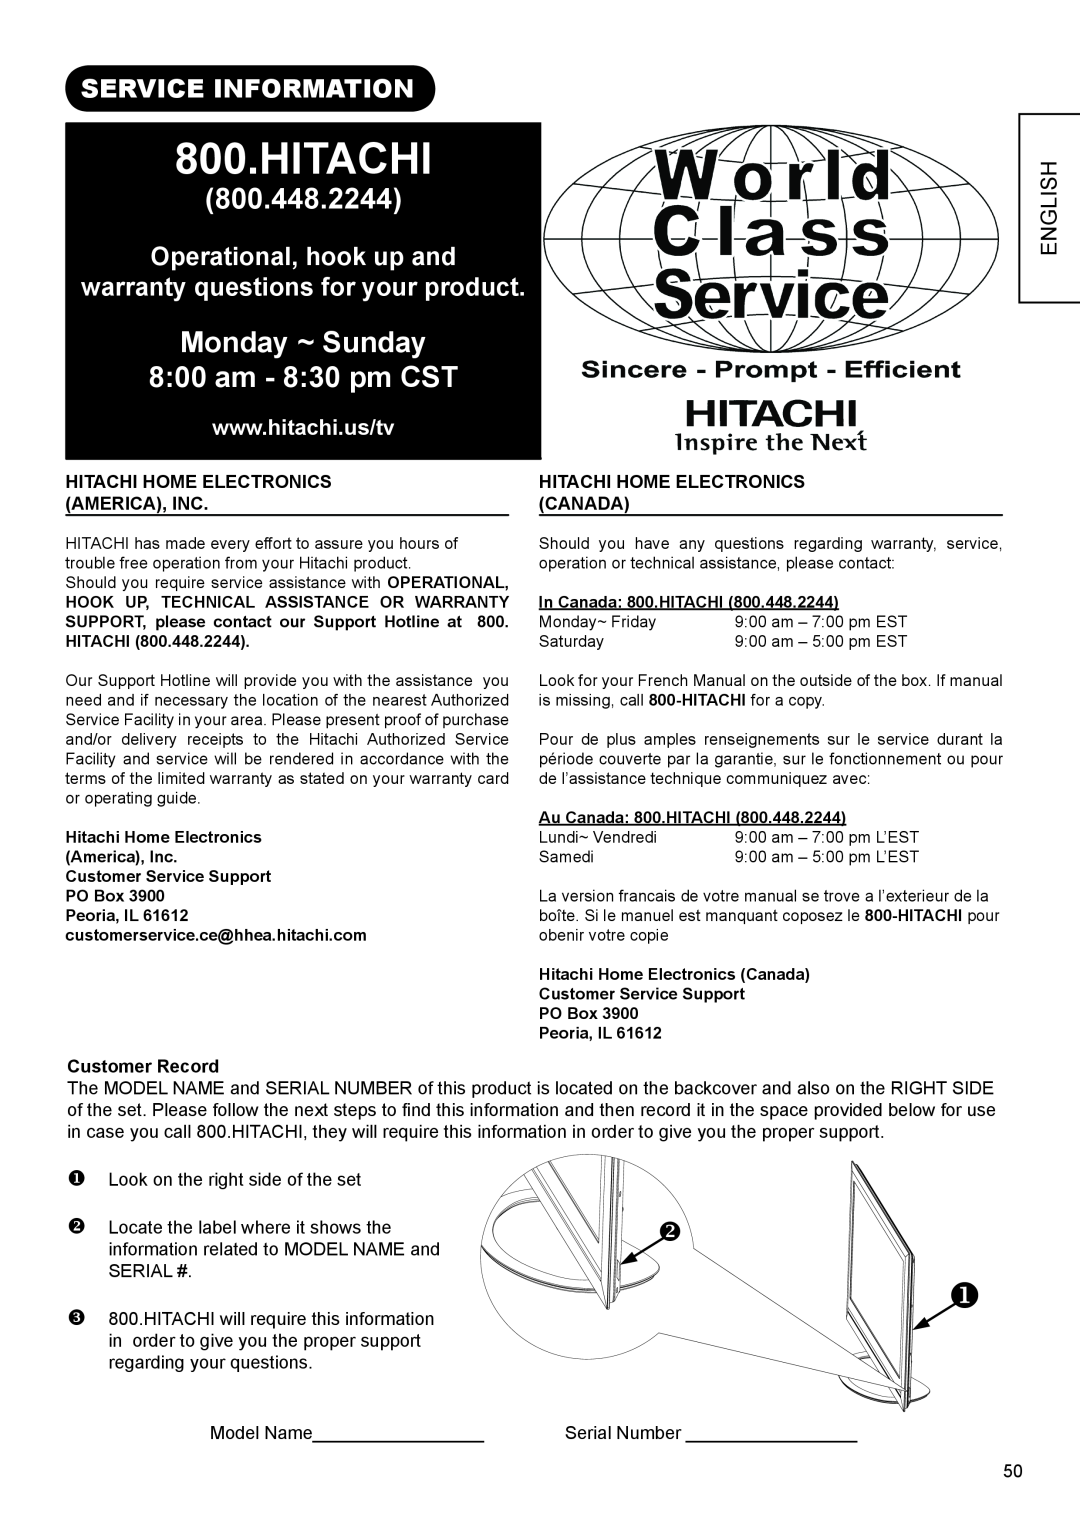 Hitachi UT32A302W Service Information, Operational, hook up and warranty questions for your product, Hitachi, 800.448.2244 